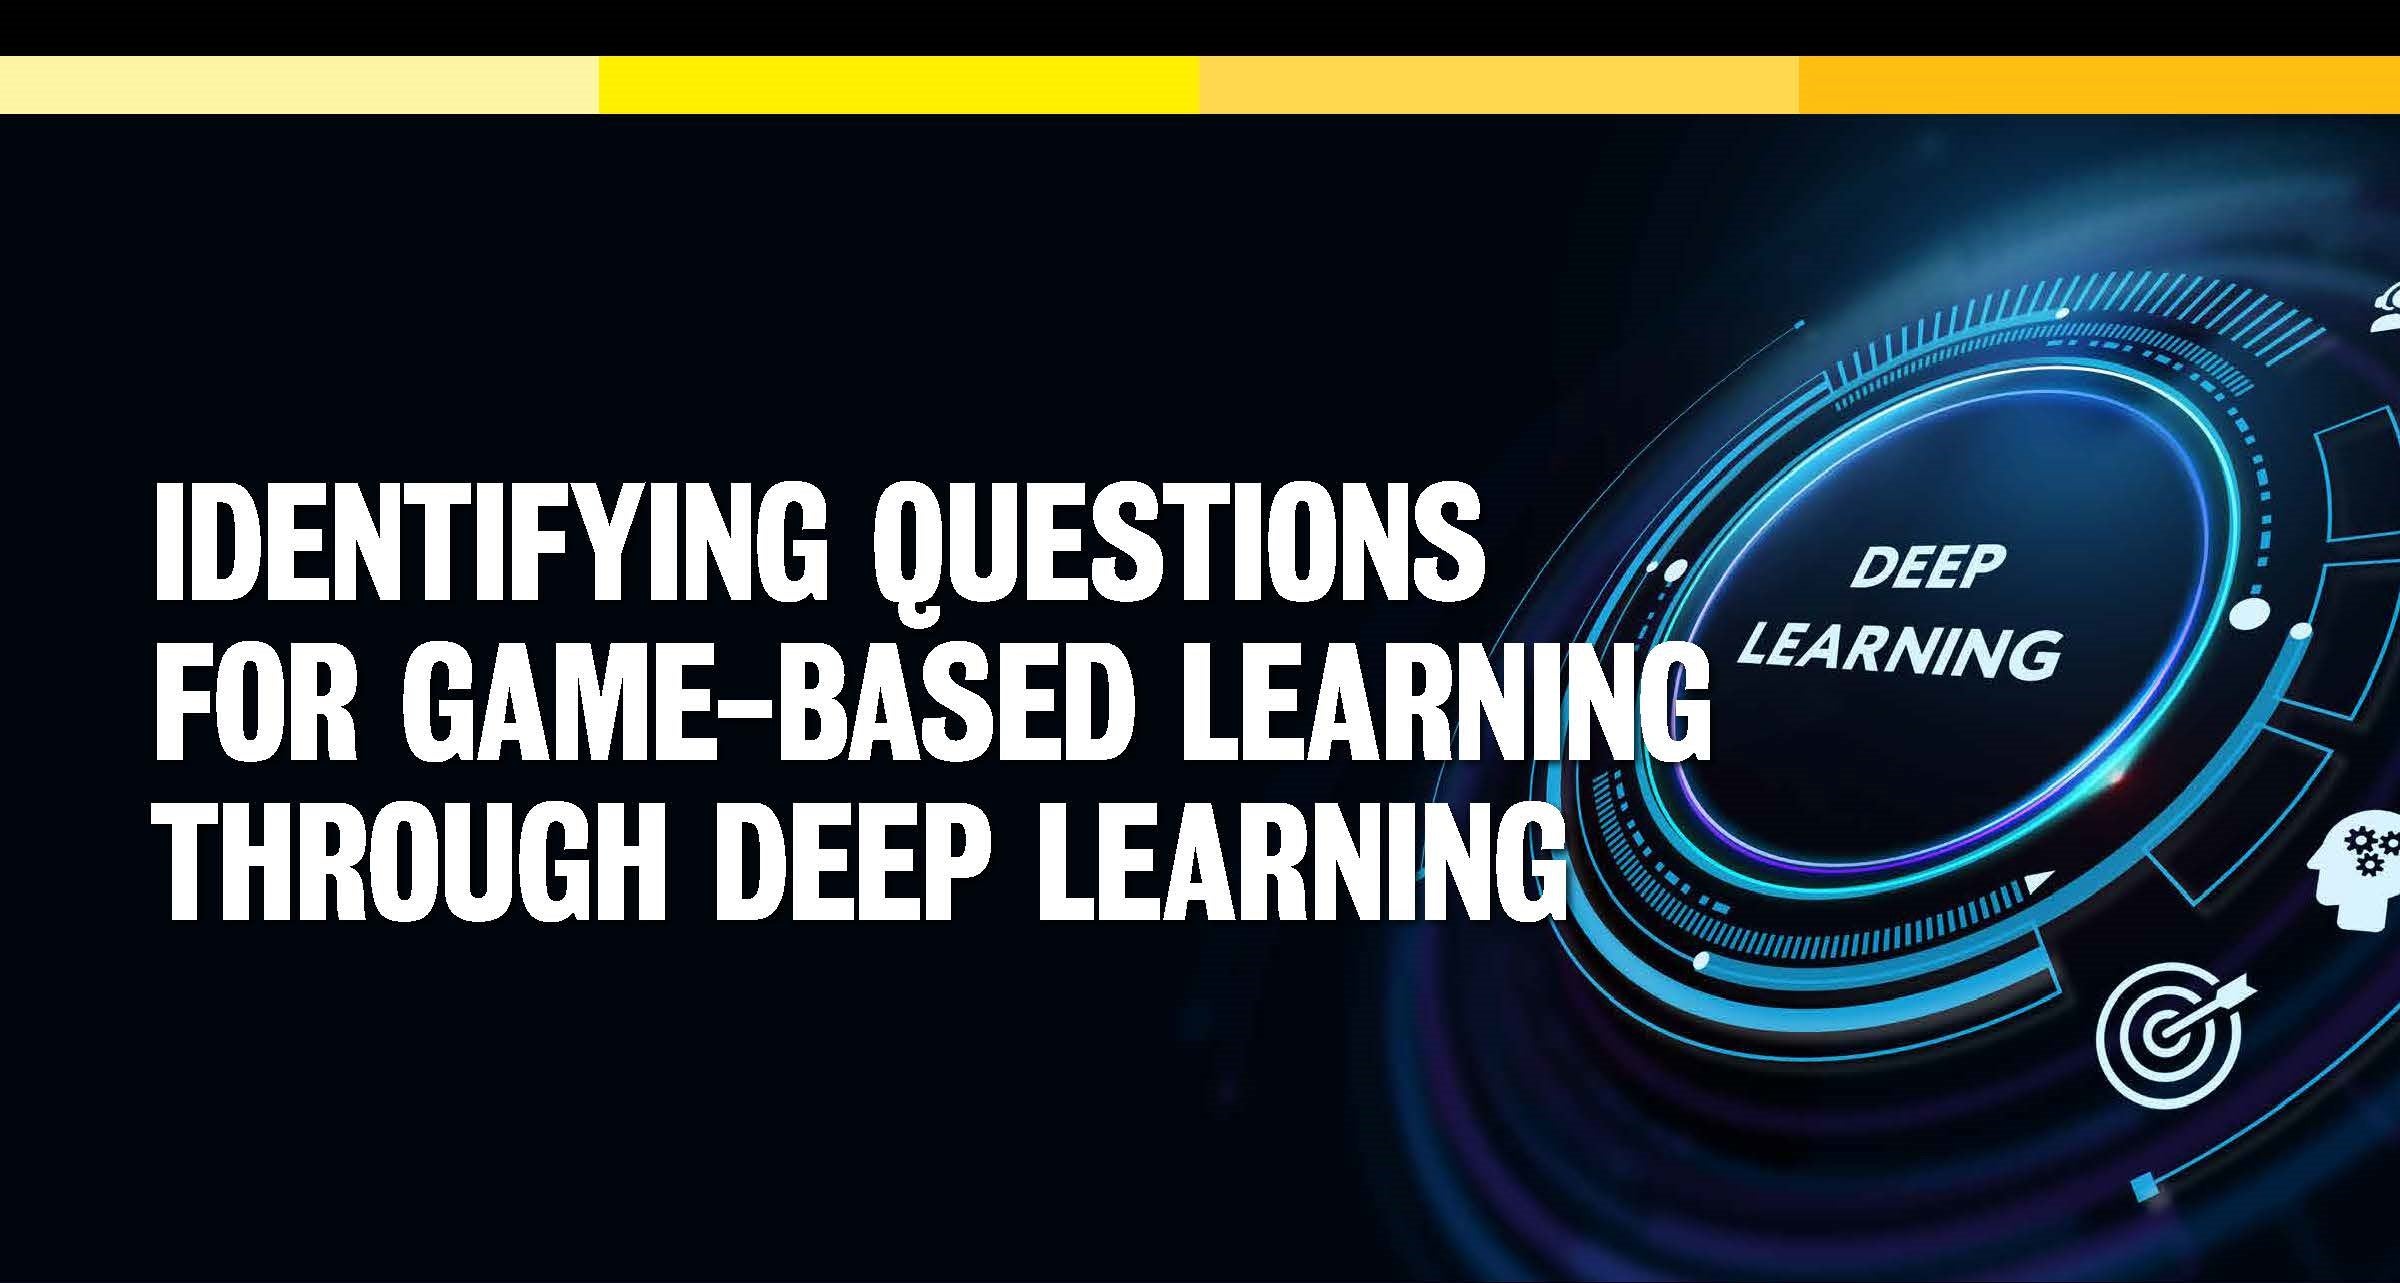 Identifying Questions for Game-Based Learning Through Deep Learning poster title; circle graphic in background